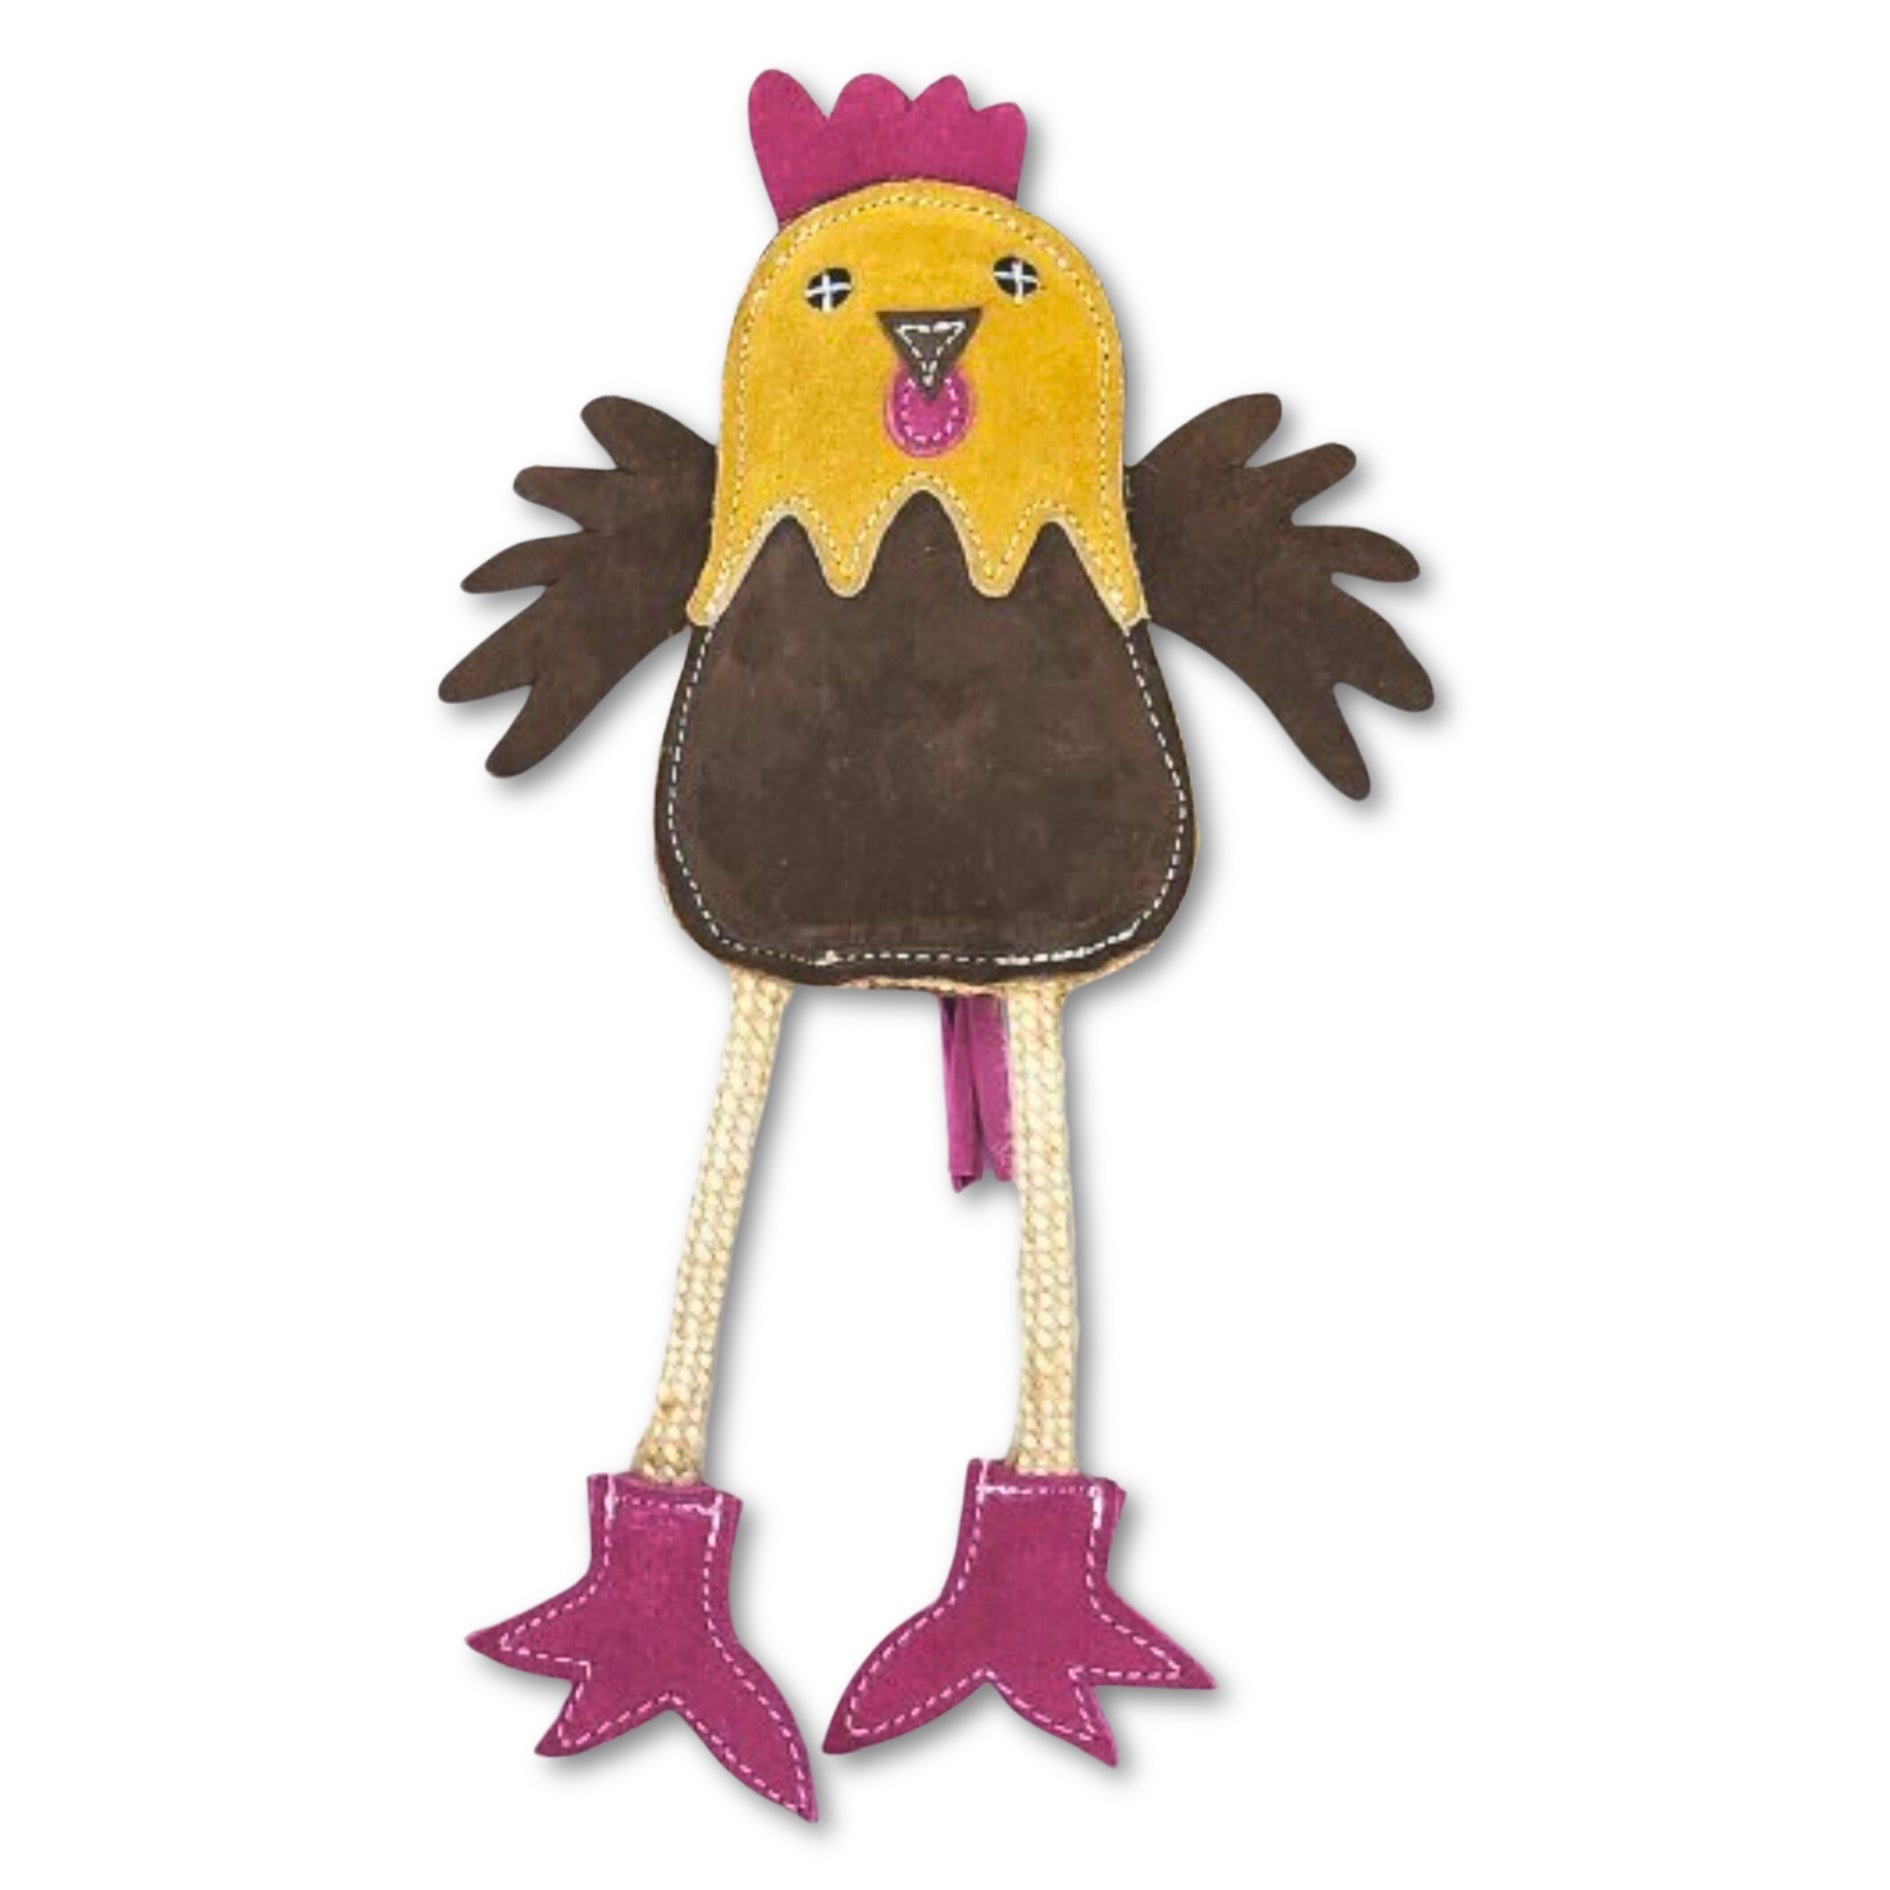 A cute chewtoy, Matilda the Chicken - Brown toy rooster with pink boots by Georgie Paws, is compostable.